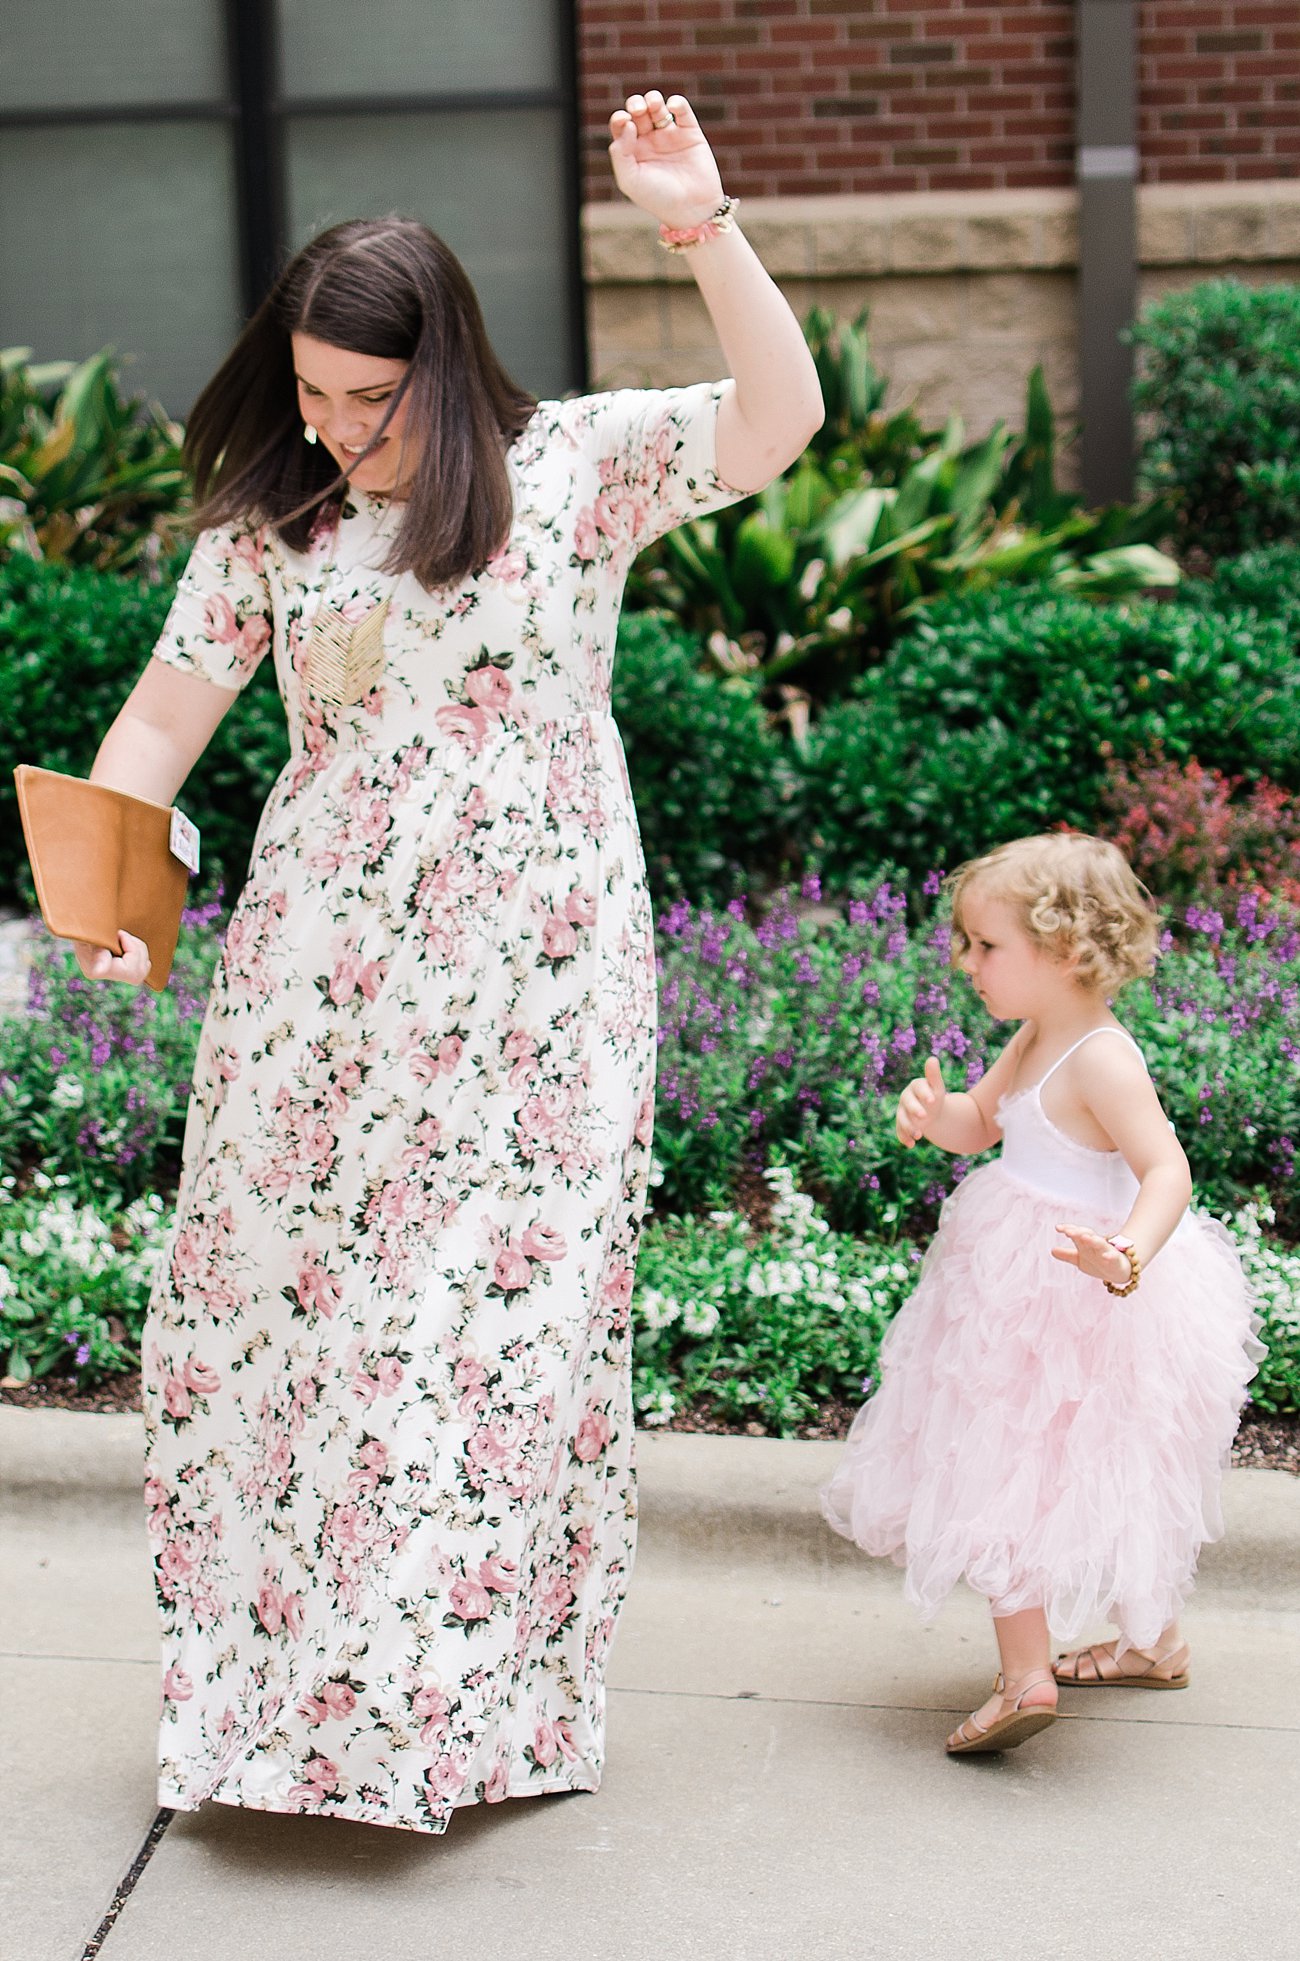 Ethical Wedding Guest Outfit Ideas for Mommy & Me by ethical fashion blogger Still Being Molly